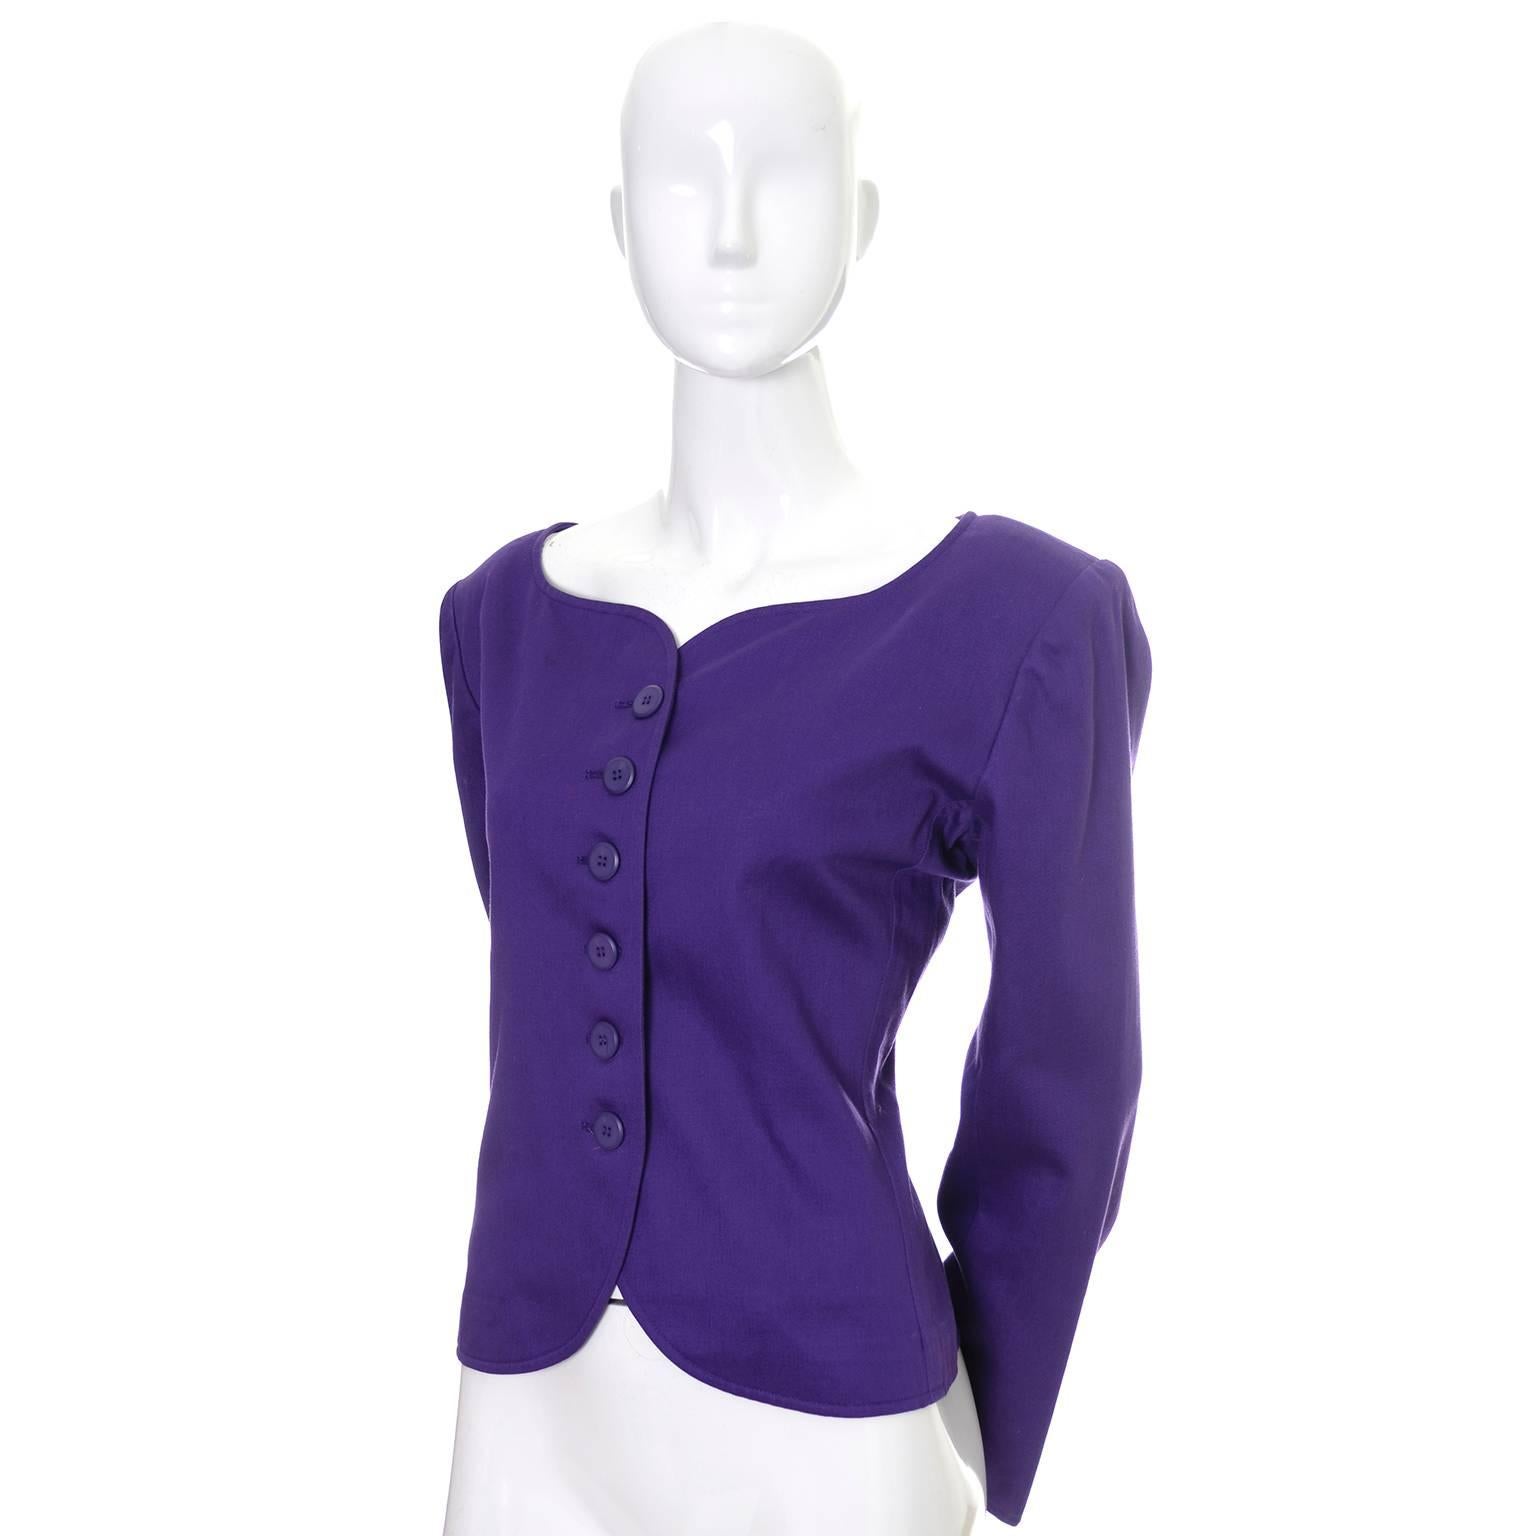 This is a great blazer from Yves Saint Laurent from the early 1980's in excellent condition. This purple cotton jacket has shoulder pads and a scalloped neckline.  This size 40 jacket has the YSL Rive Gauche label and was made in France. This is